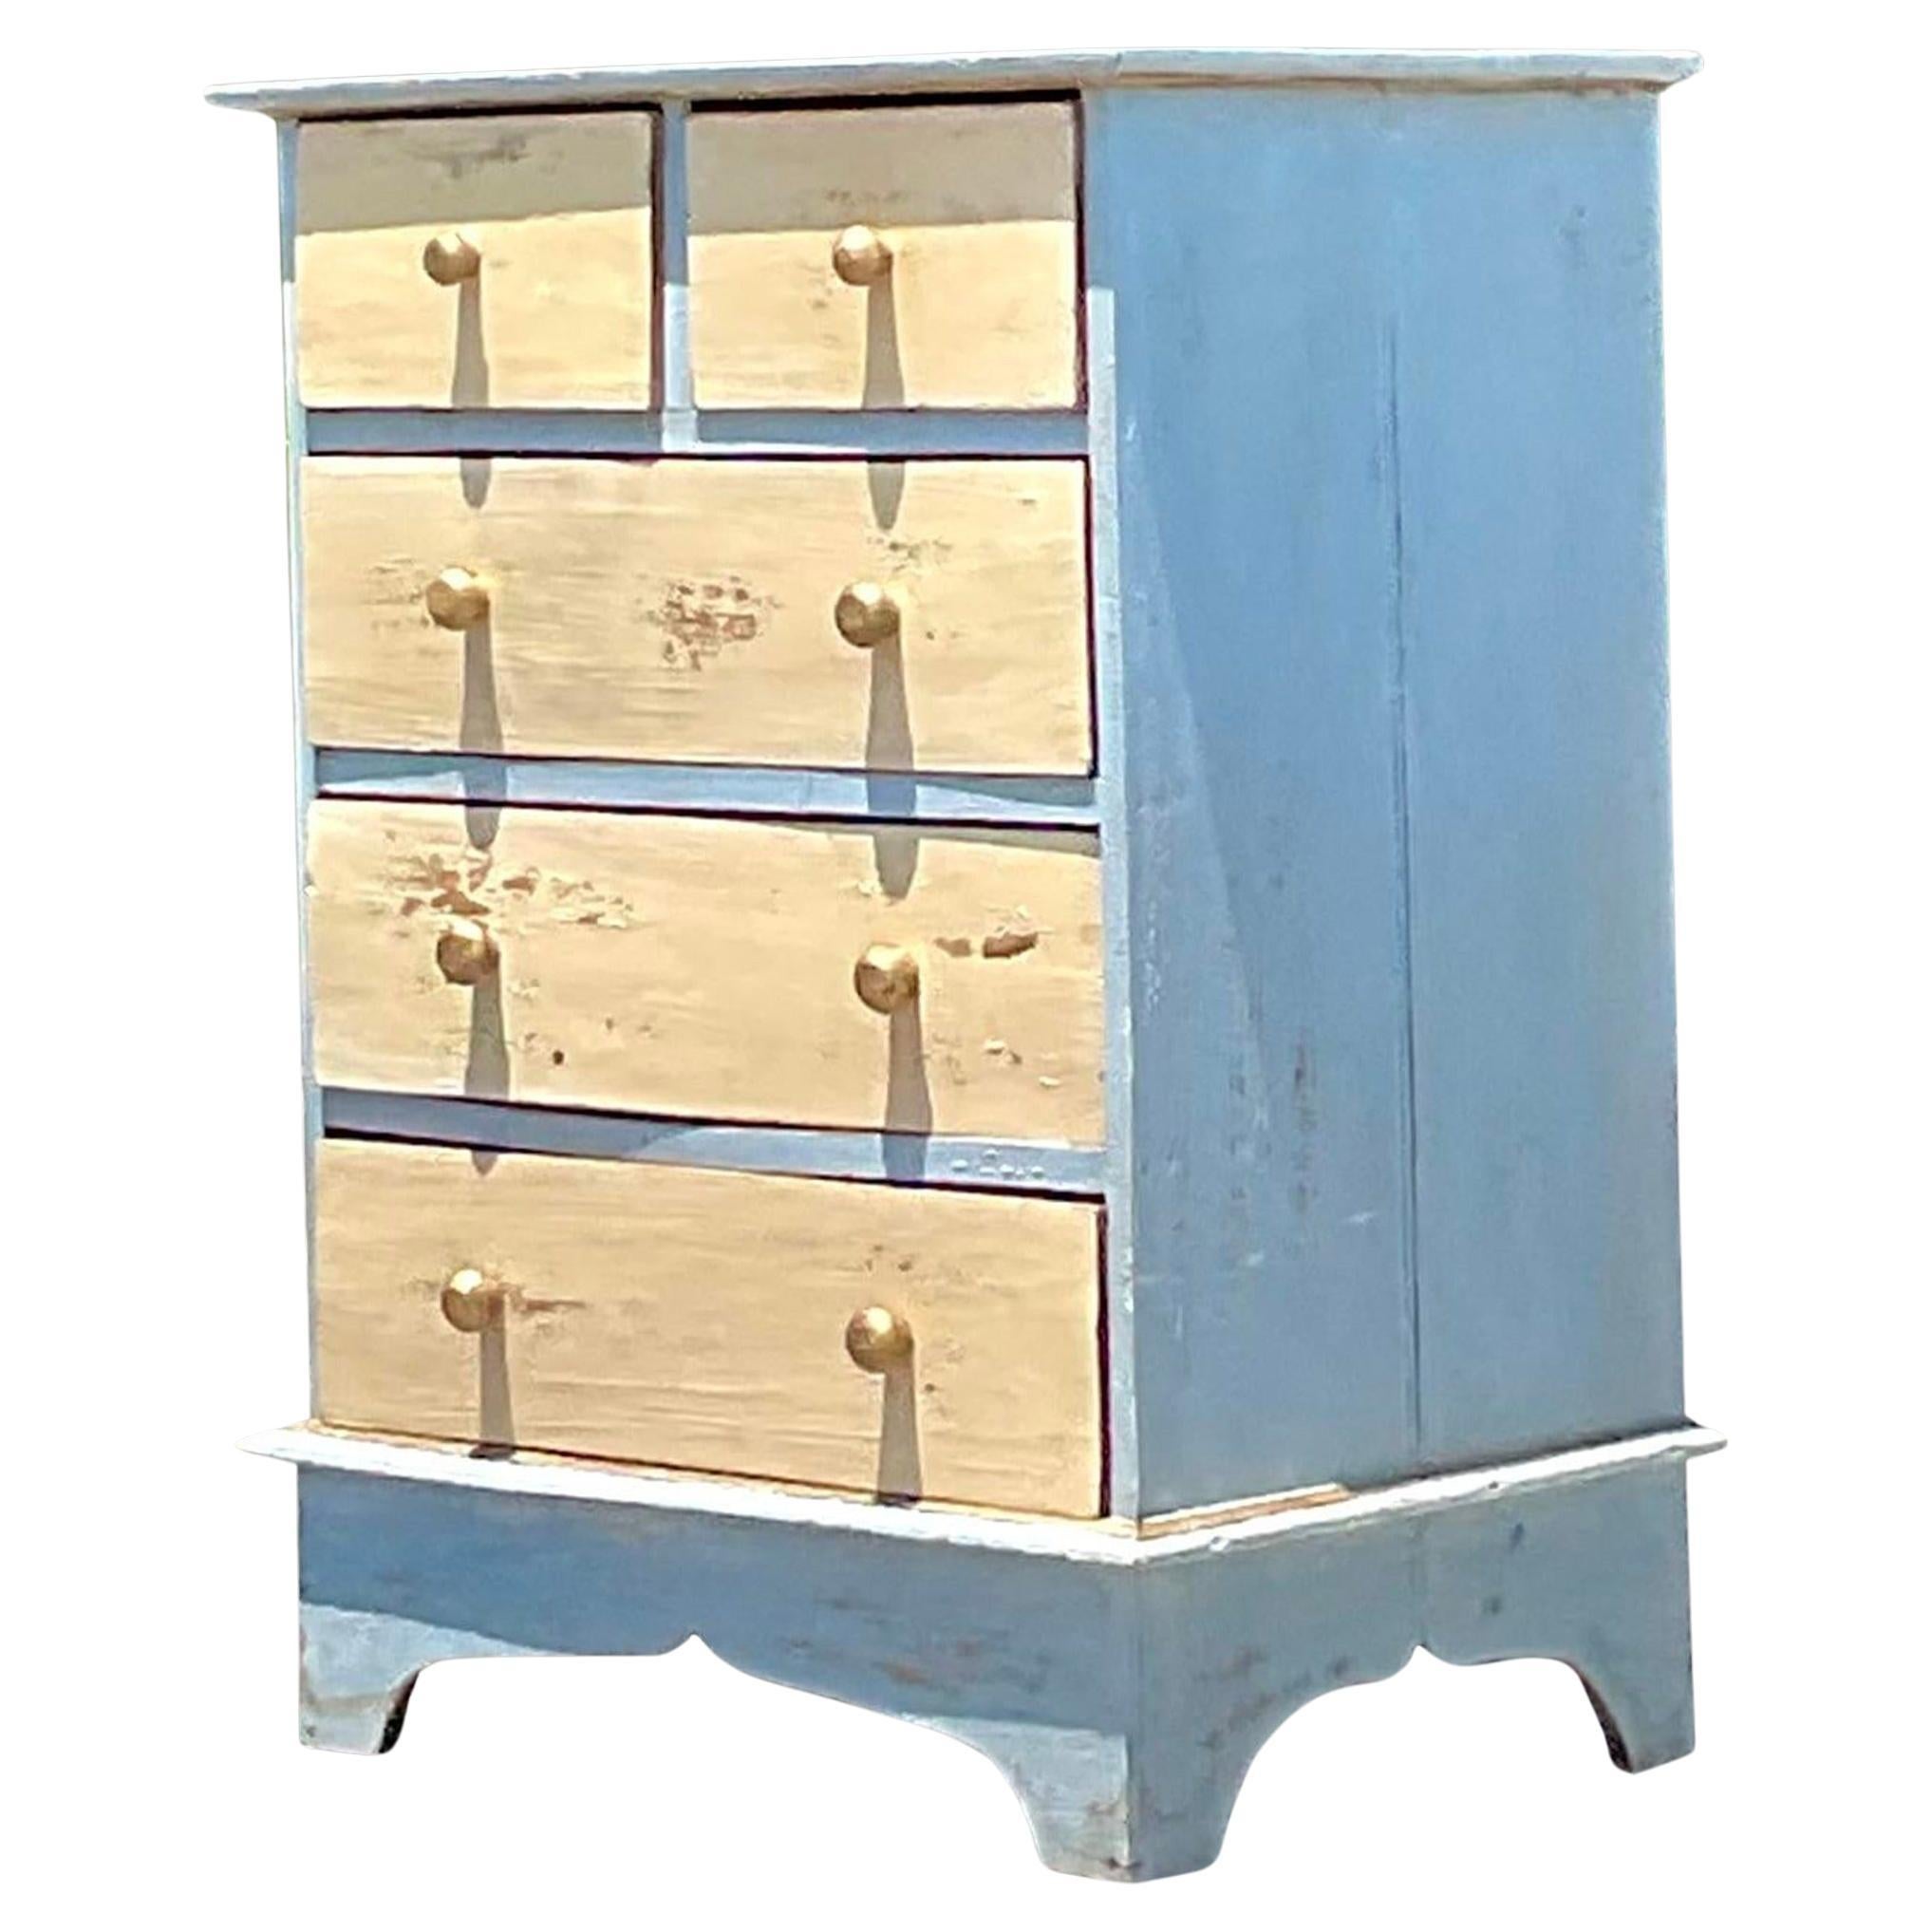 Early 20th Century Primitive Petite Chest of Drawers